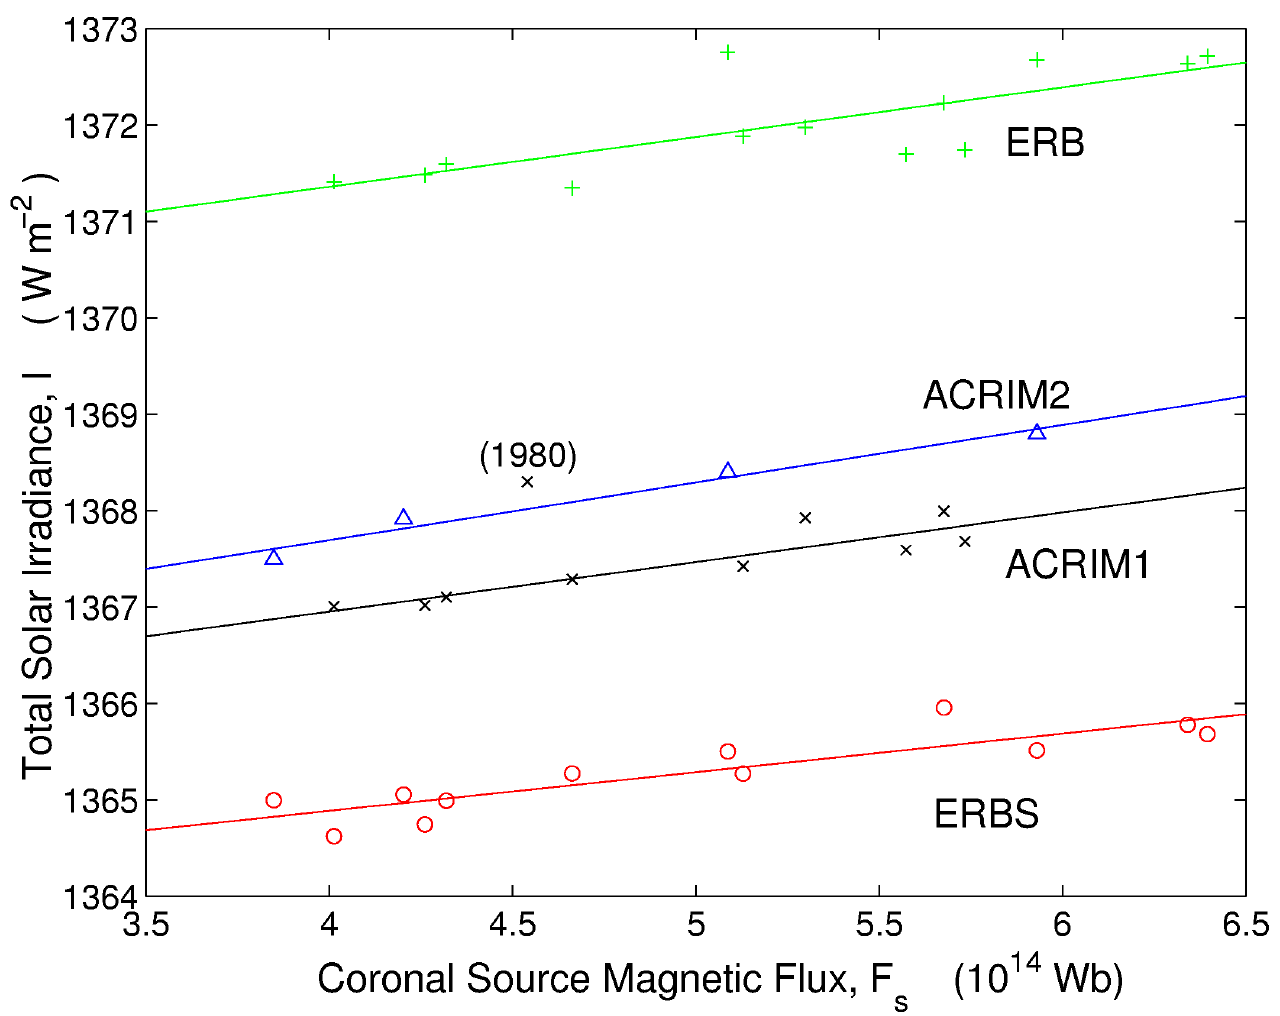 Scatter plots of total solar irradiance